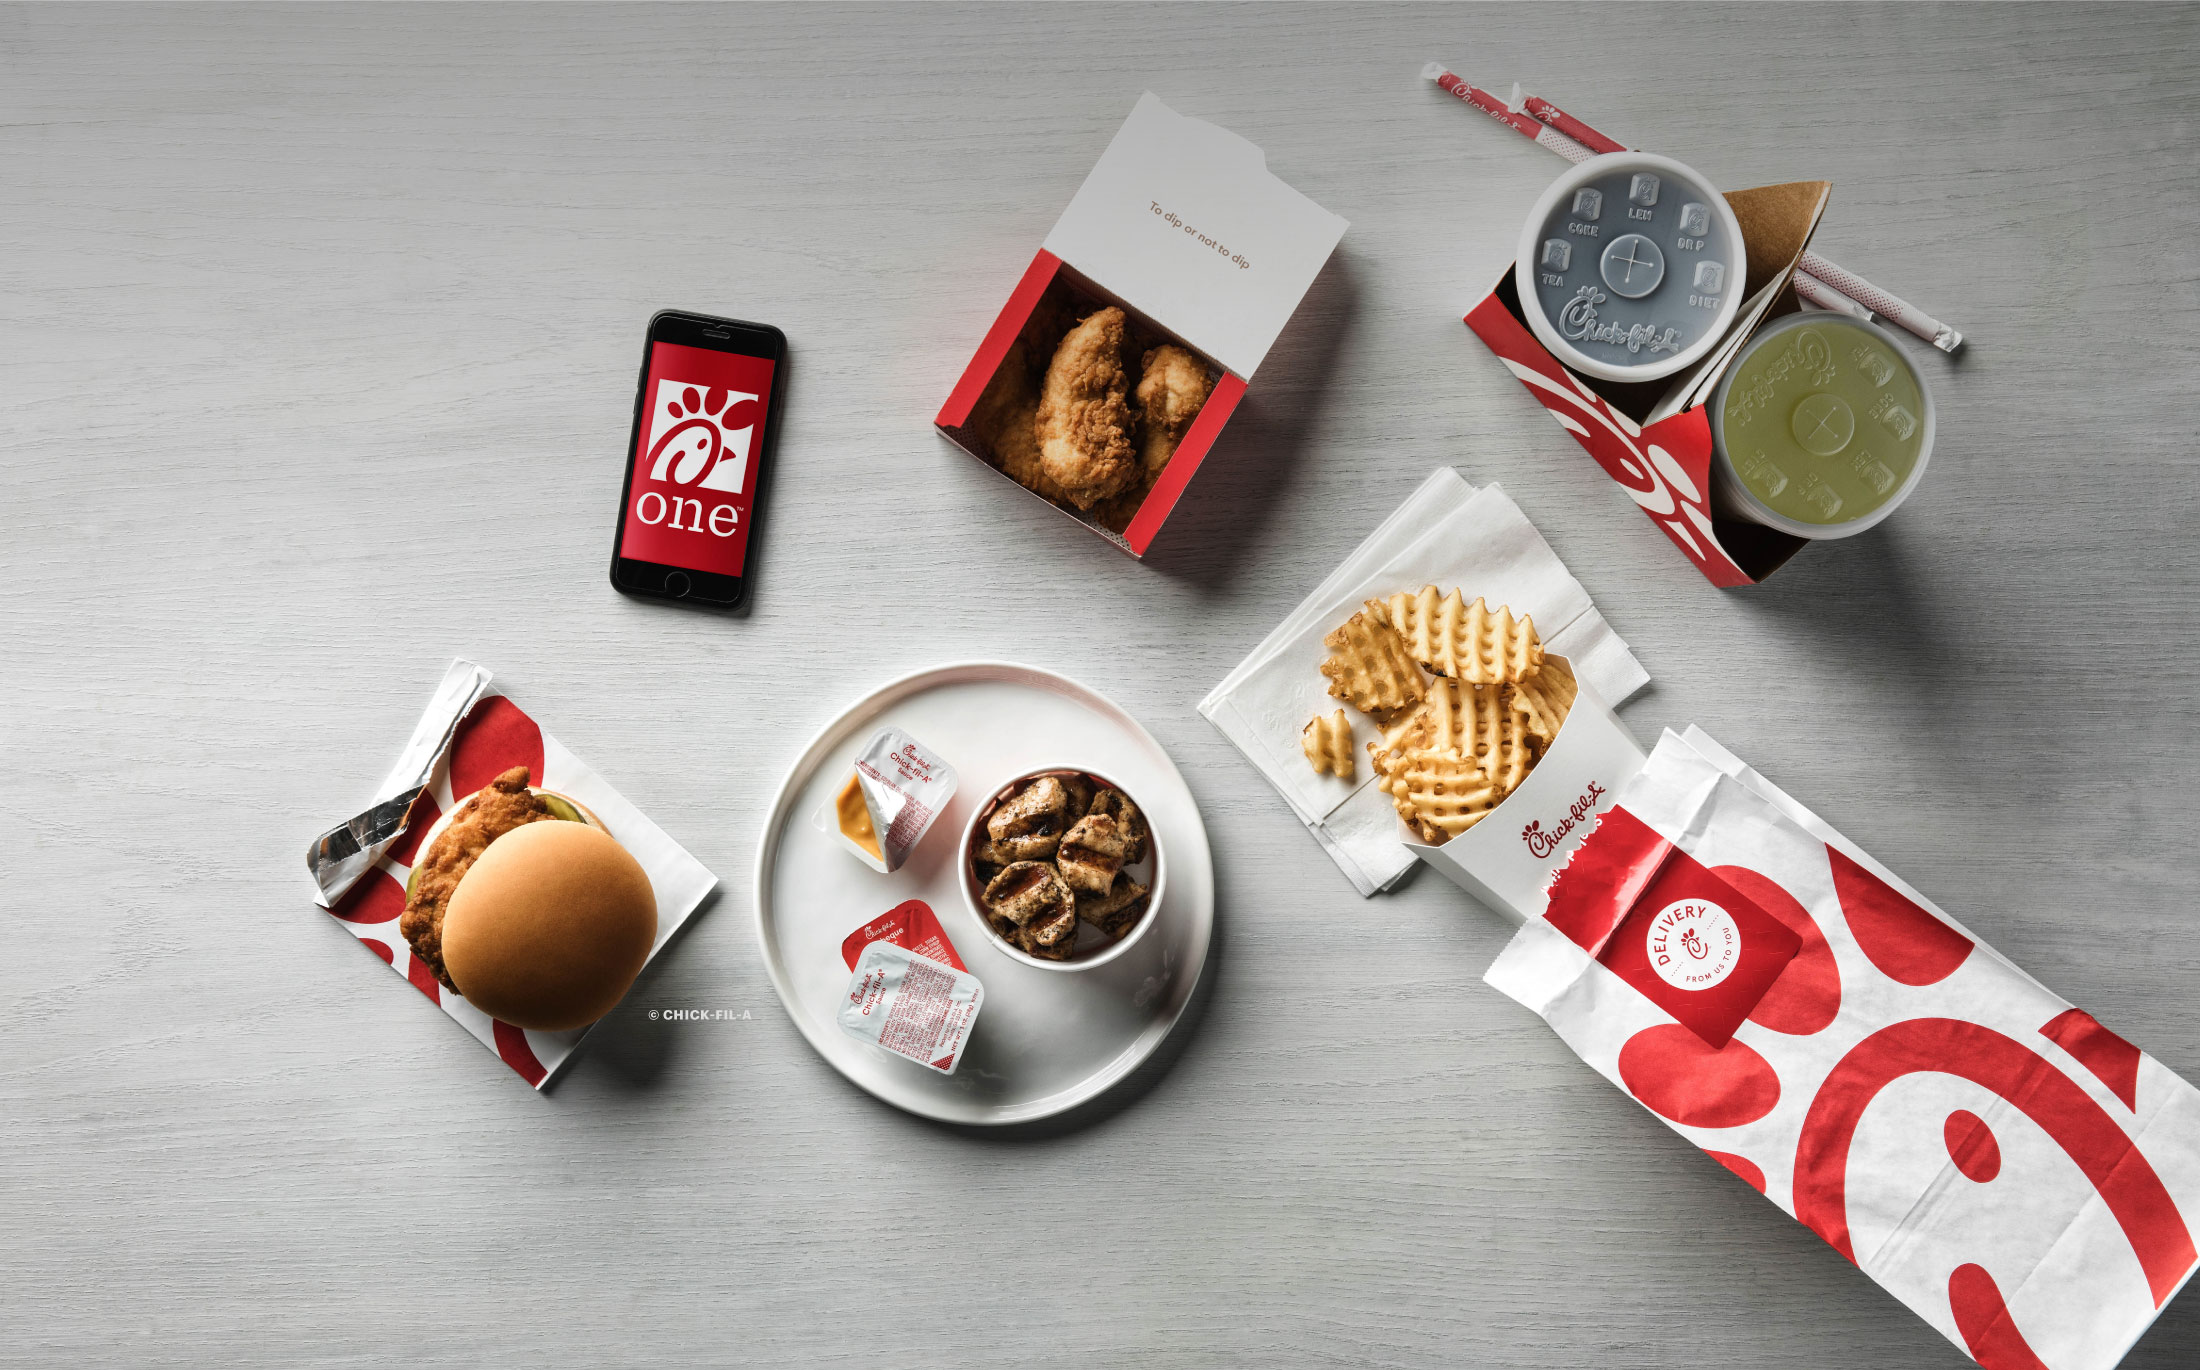 Chick-fil-A meal showing multiple packaging types